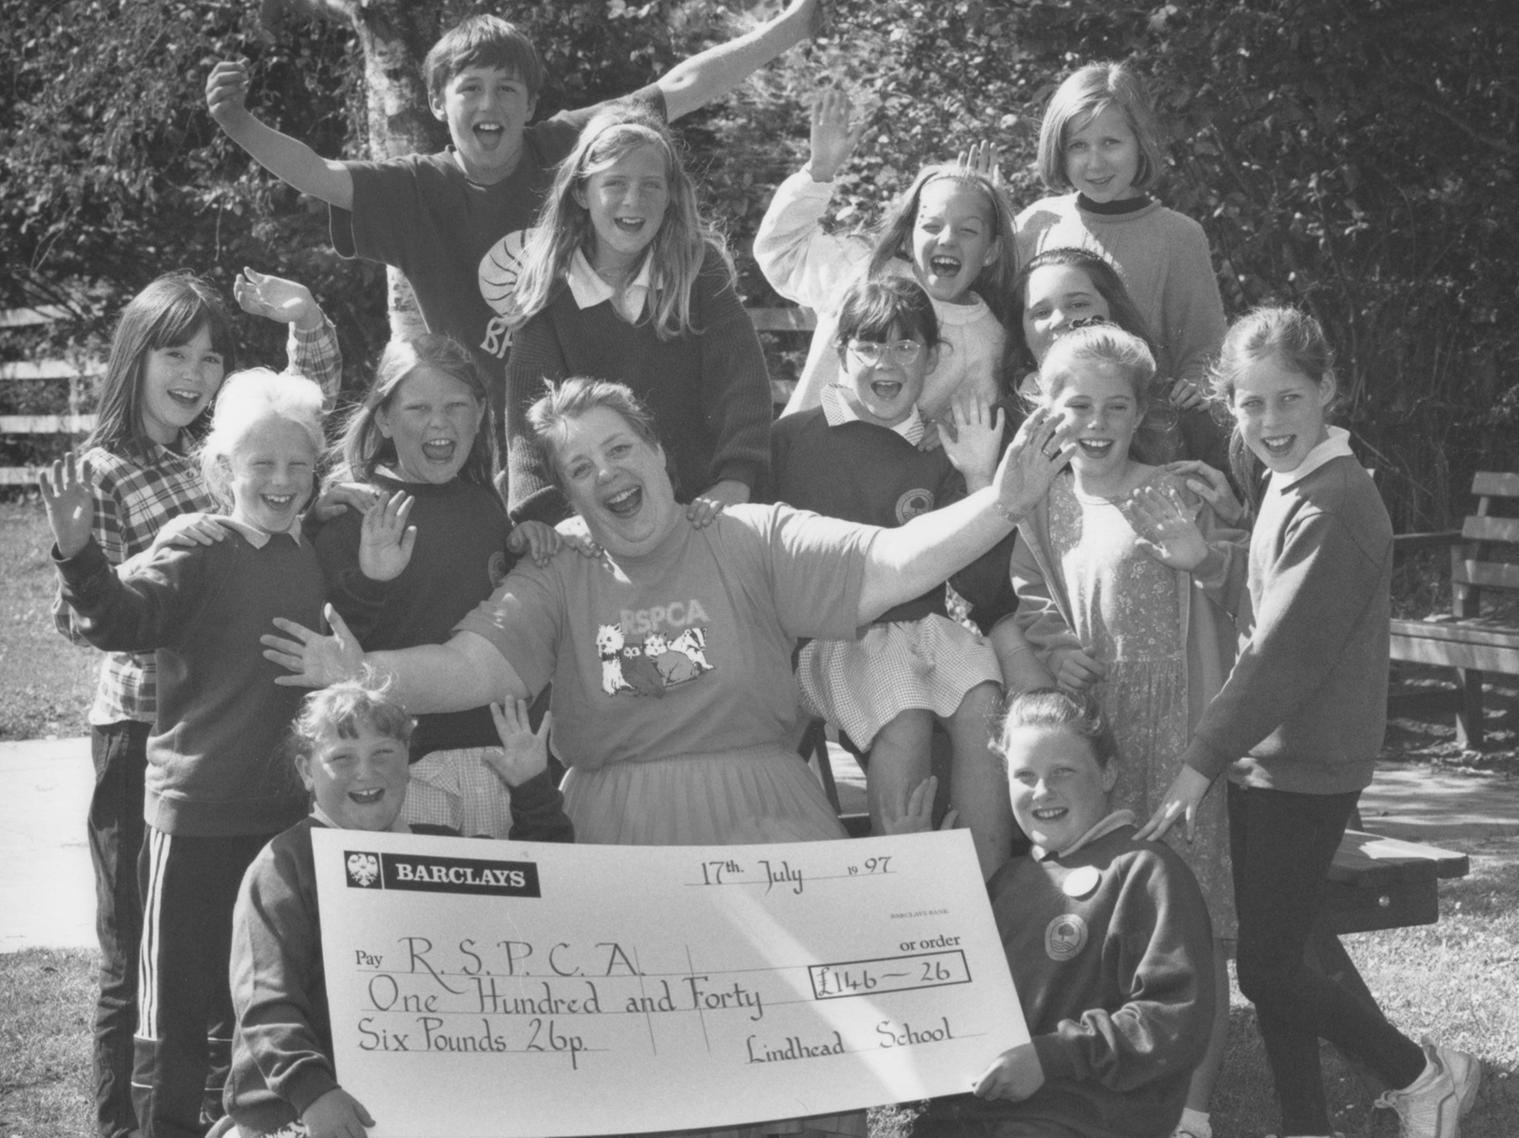 Pupils from Lindhead School handed over a cheque for 146 they raised by a sponsored swim for the RSPCA to local branch treasurer Barbara Bunfield (centre) in July 1997. Pictured with Barbara holding the cheque are sisters Sally Probert, left, and Laura Probert, who came up with the fundraising idea. They are surrounded by their fellow swimmers.